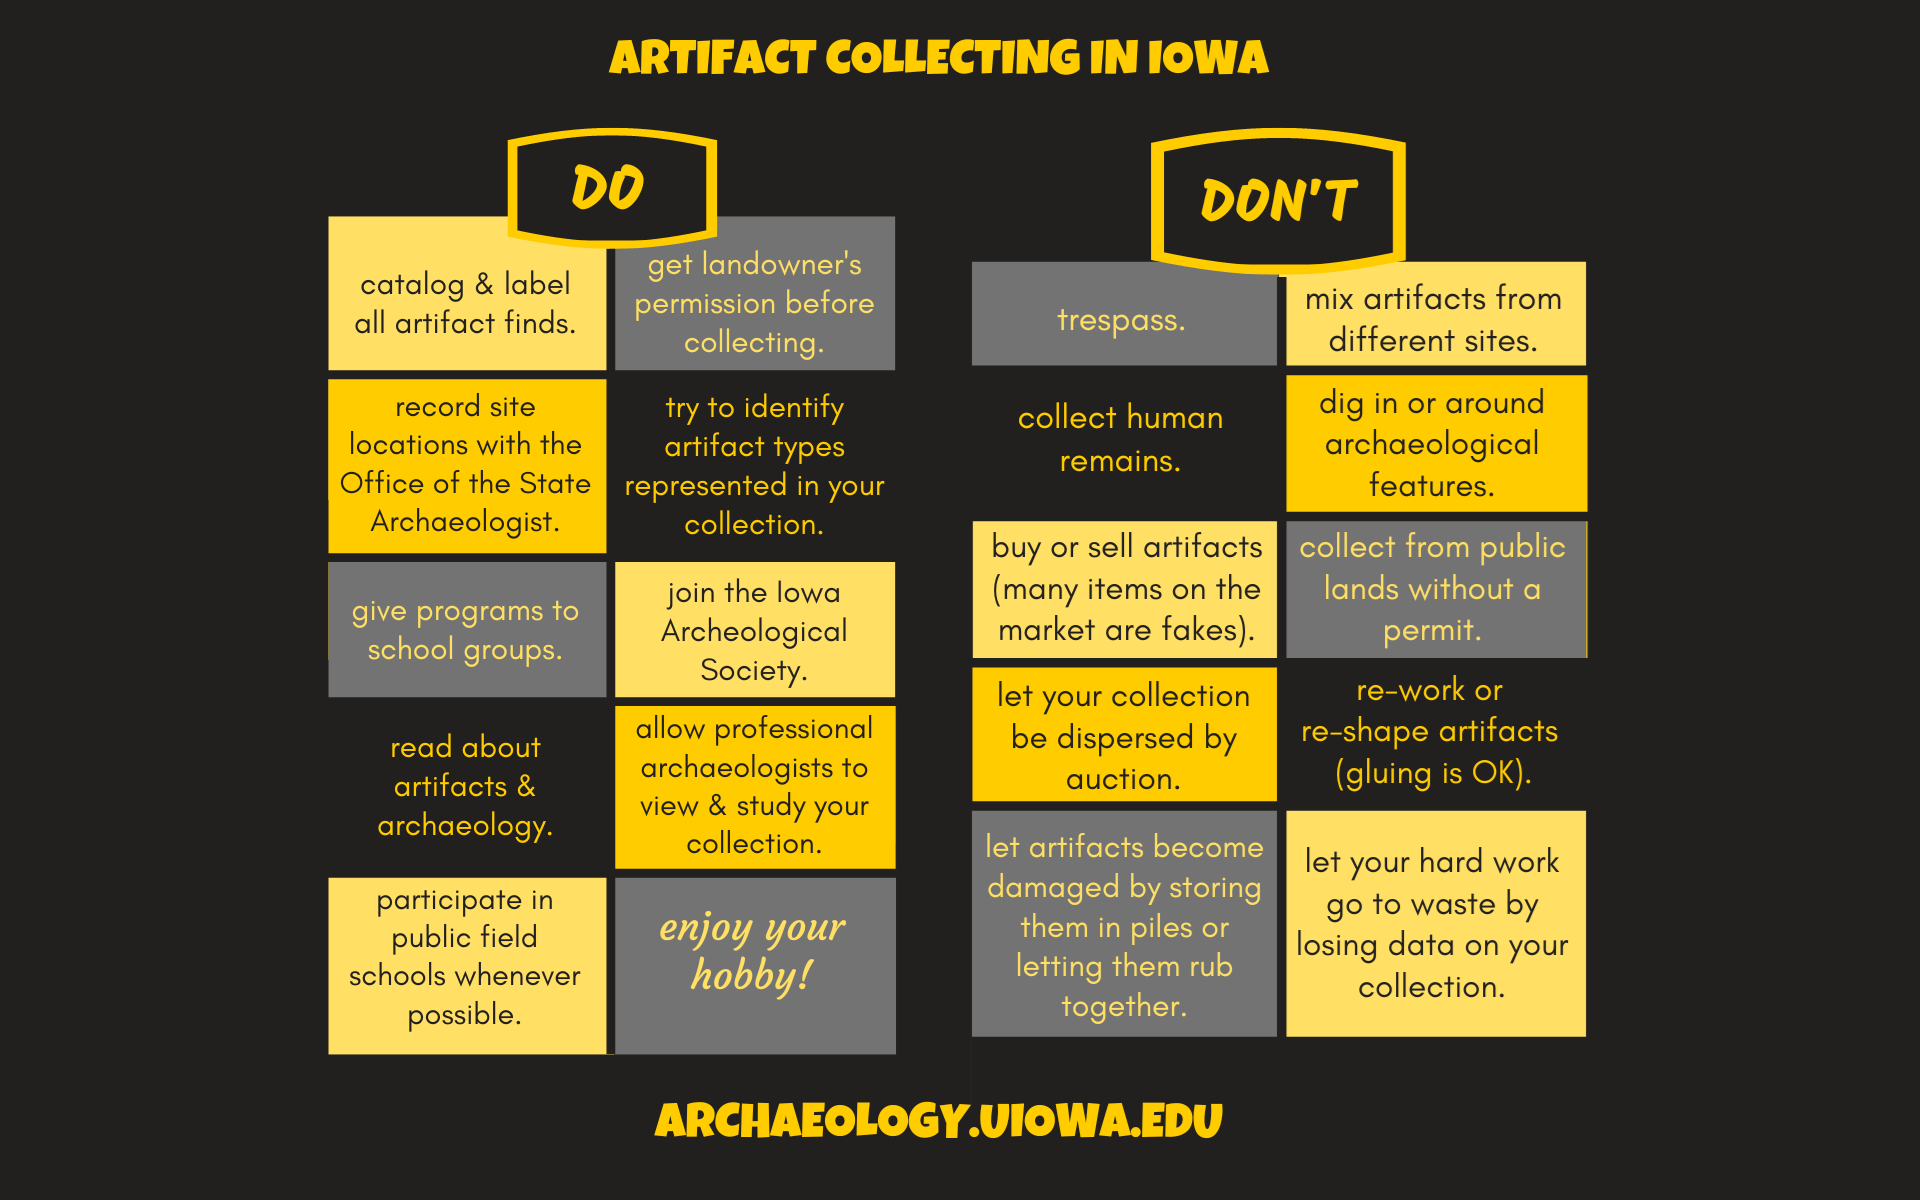 A list of do's and don'ts for collecting artifacts in Iowa